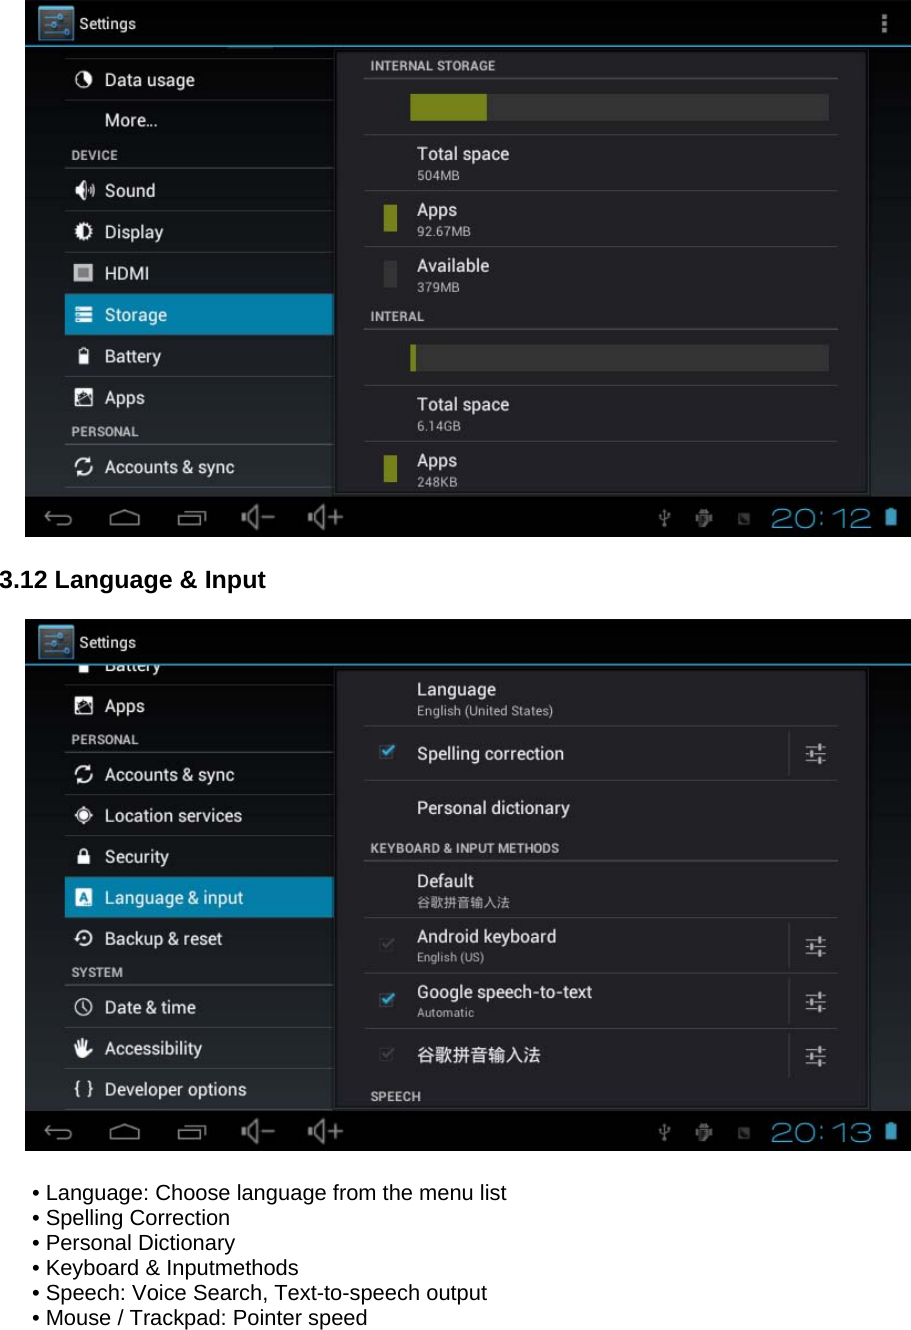   3.12 Language &amp; Input    • Language: Choose language from the menu list • Spelling Correction • Personal Dictionary • Keyboard &amp; Inputmethods • Speech: Voice Search, Text-to-speech output • Mouse / Trackpad: Pointer speed 